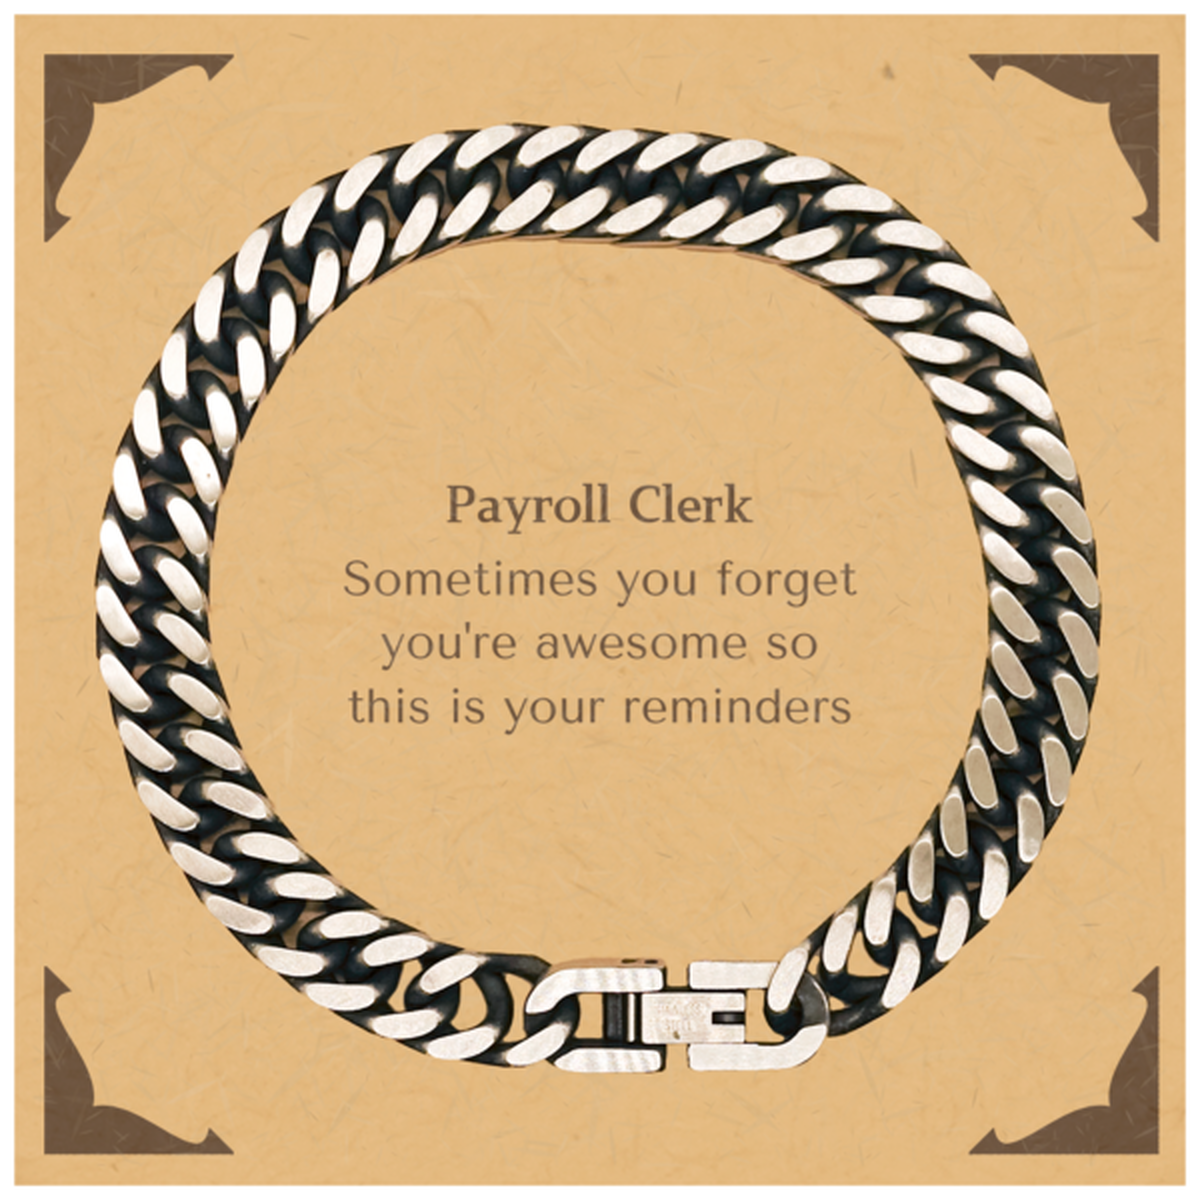 Sentimental Payroll Clerk Cuban Link Chain Bracelet, Payroll Clerk Sometimes you forget you're awesome so this is your reminders, Graduation Christmas Birthday Gifts for Payroll Clerk, Men, Women, Coworkers